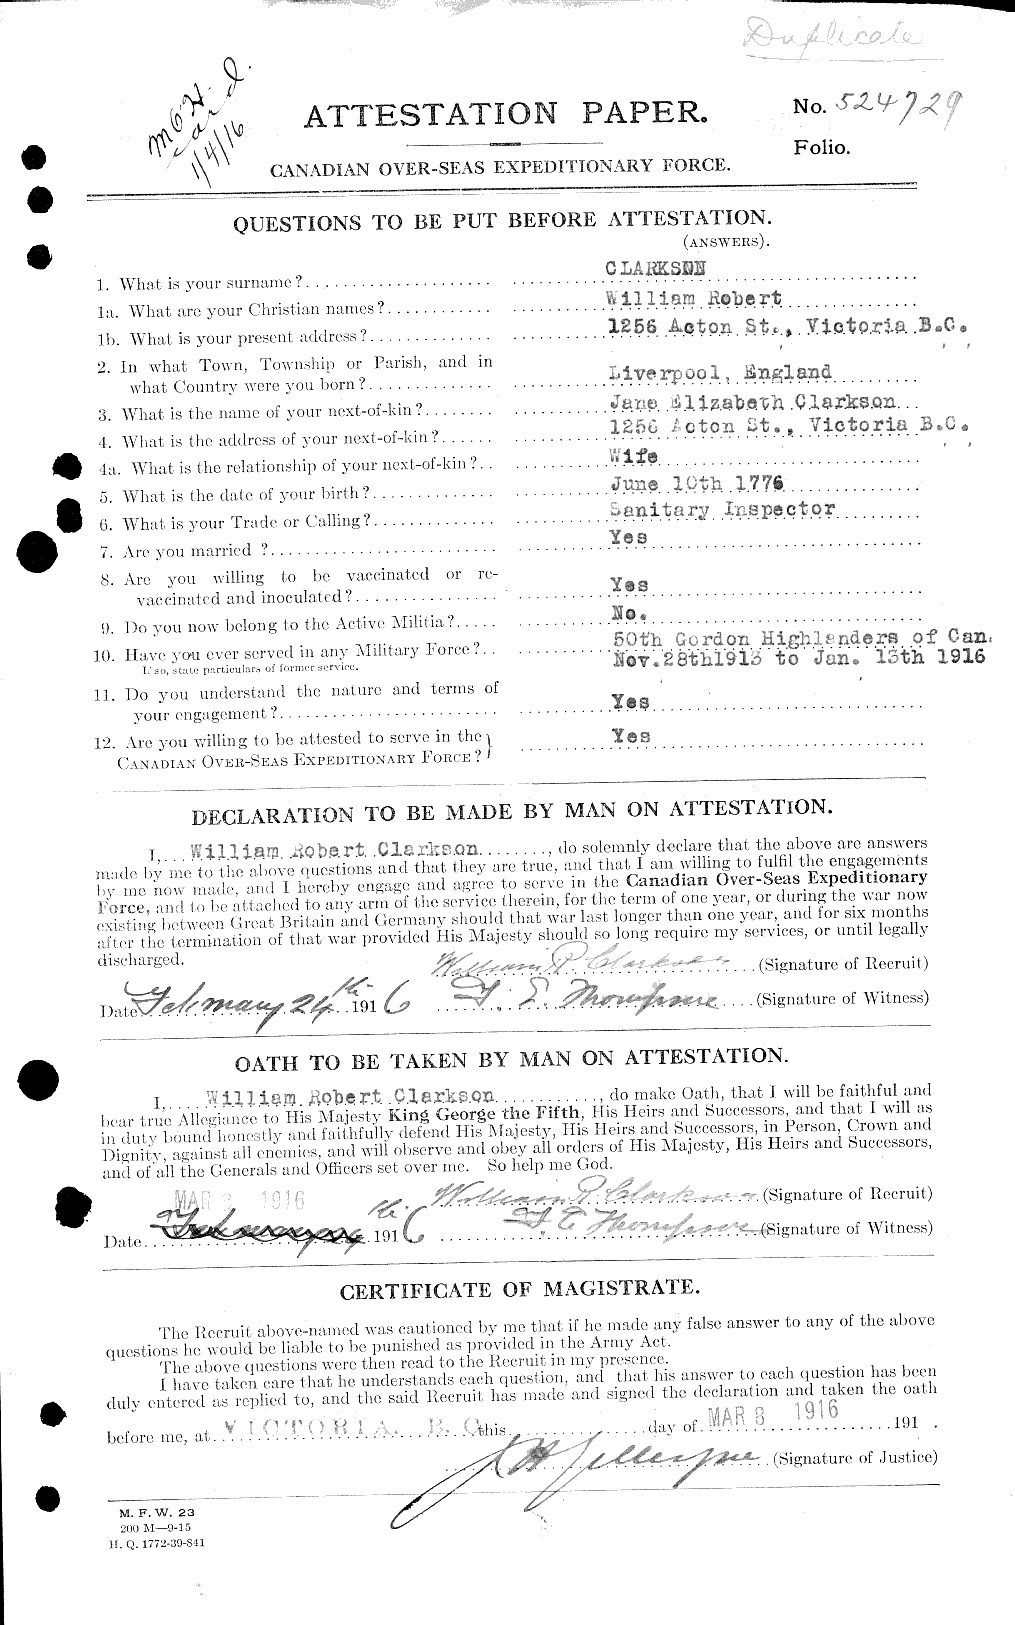 Personnel Records of the First World War - CEF 019027a